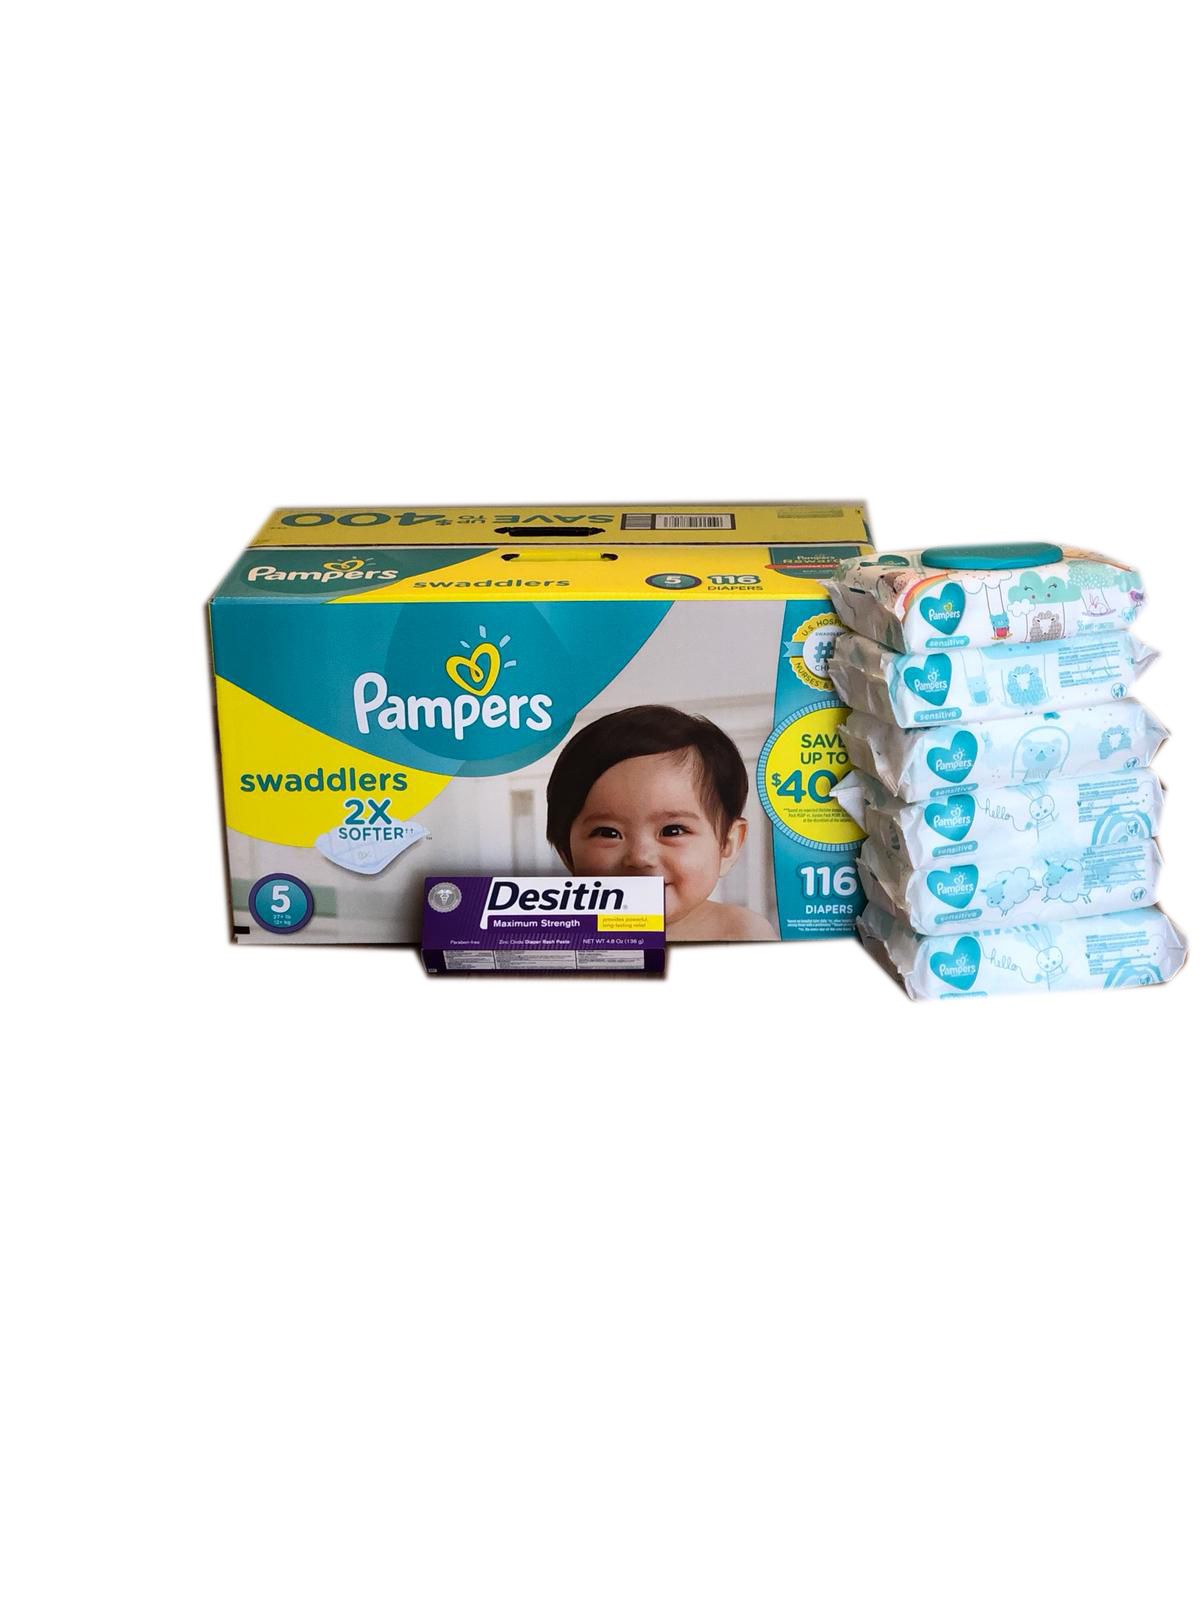 Pampers Swaddlers Size 5 with Desitin